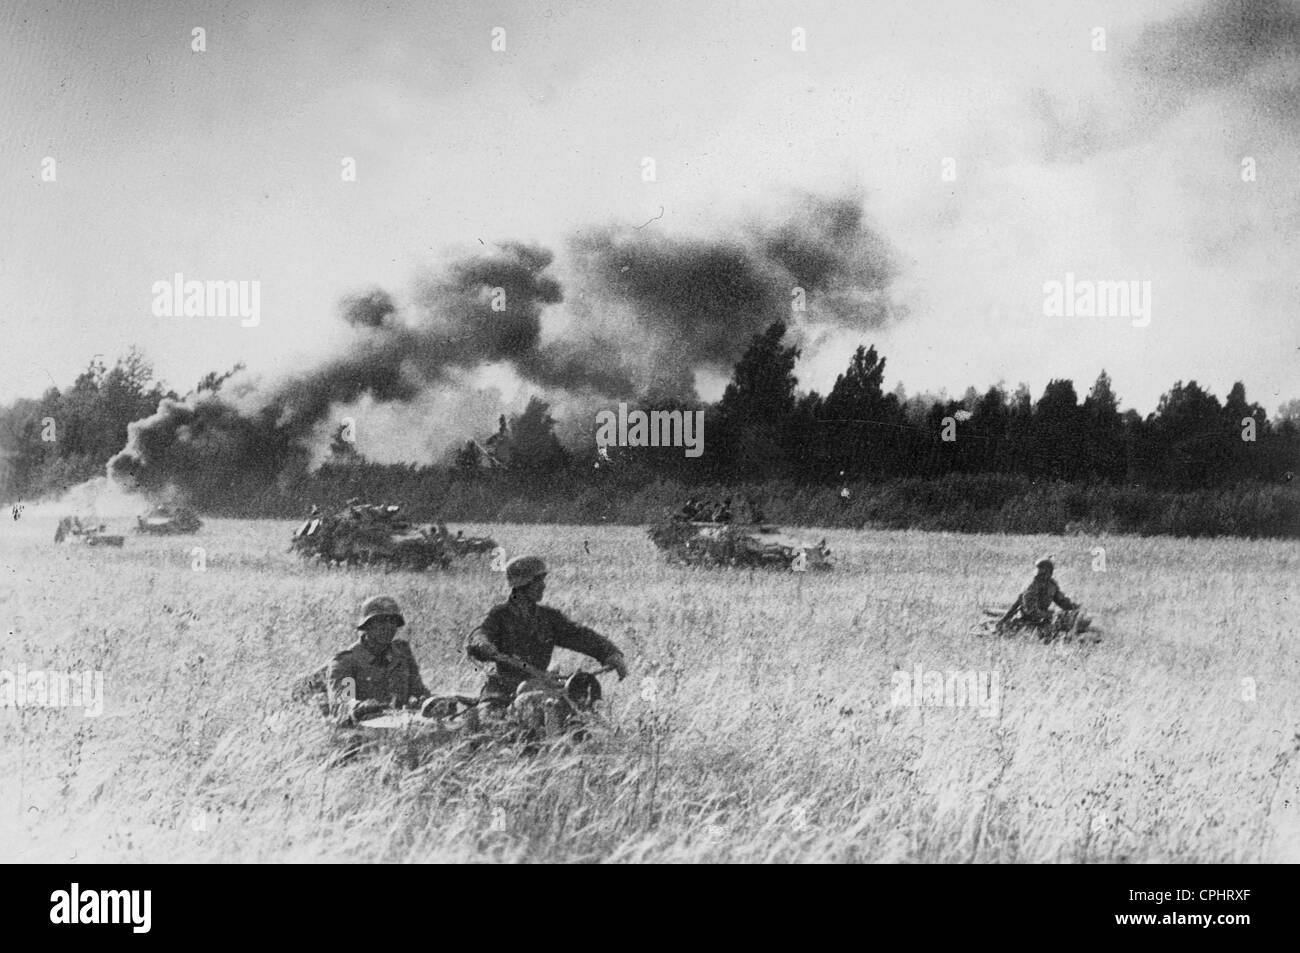 German motorcycle gunners and armored fighting vehicles, 1944 Stock Photo